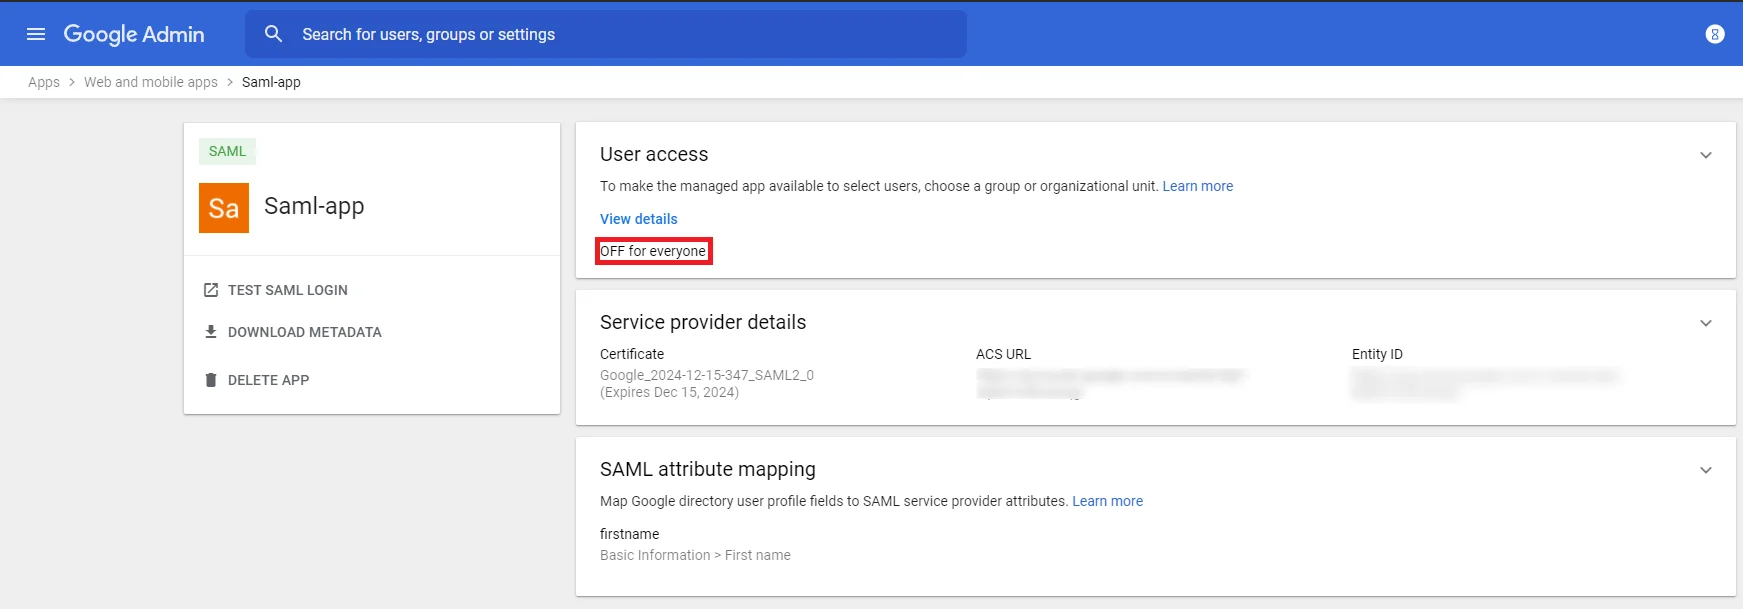 Configure Google Apps as IDP - SAML Single Sign-On(SSO) for Magento - Google Apps SSO Login, Turn-On go to SAML Apps